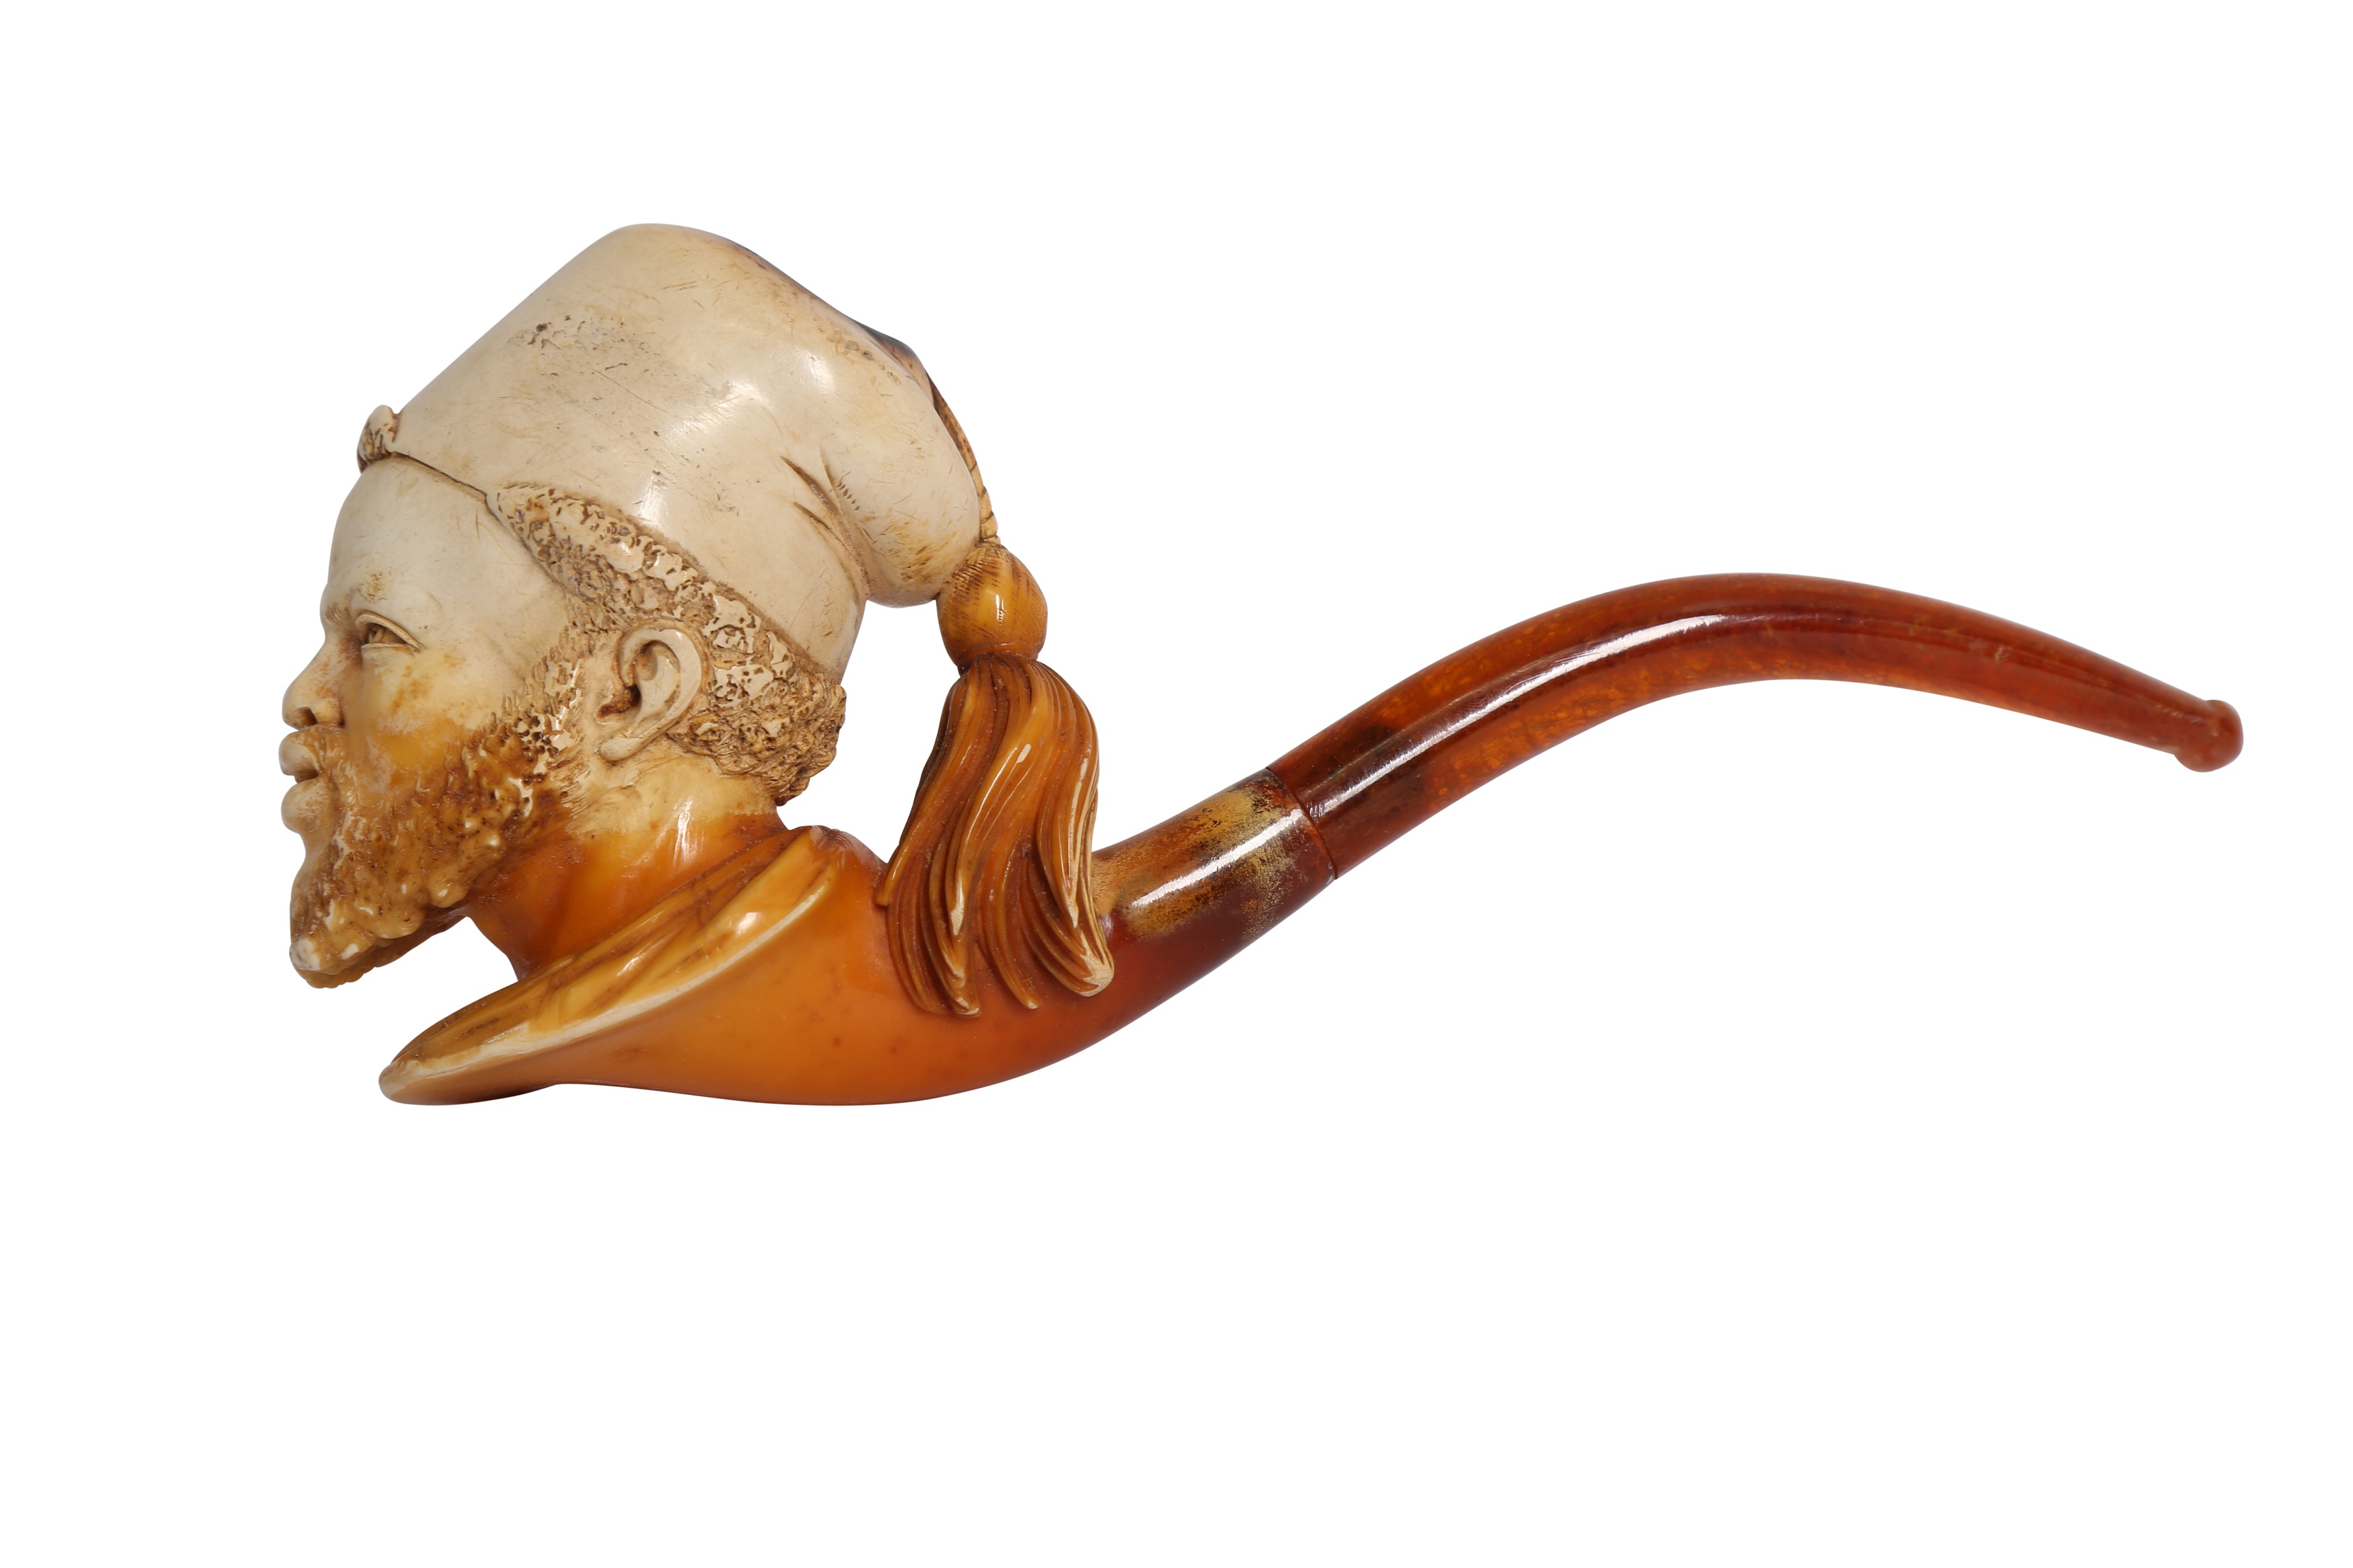 A CASED MEERSCHAUM PIPE WITH A TURKISH PASHA'S HEAD - Image 3 of 6